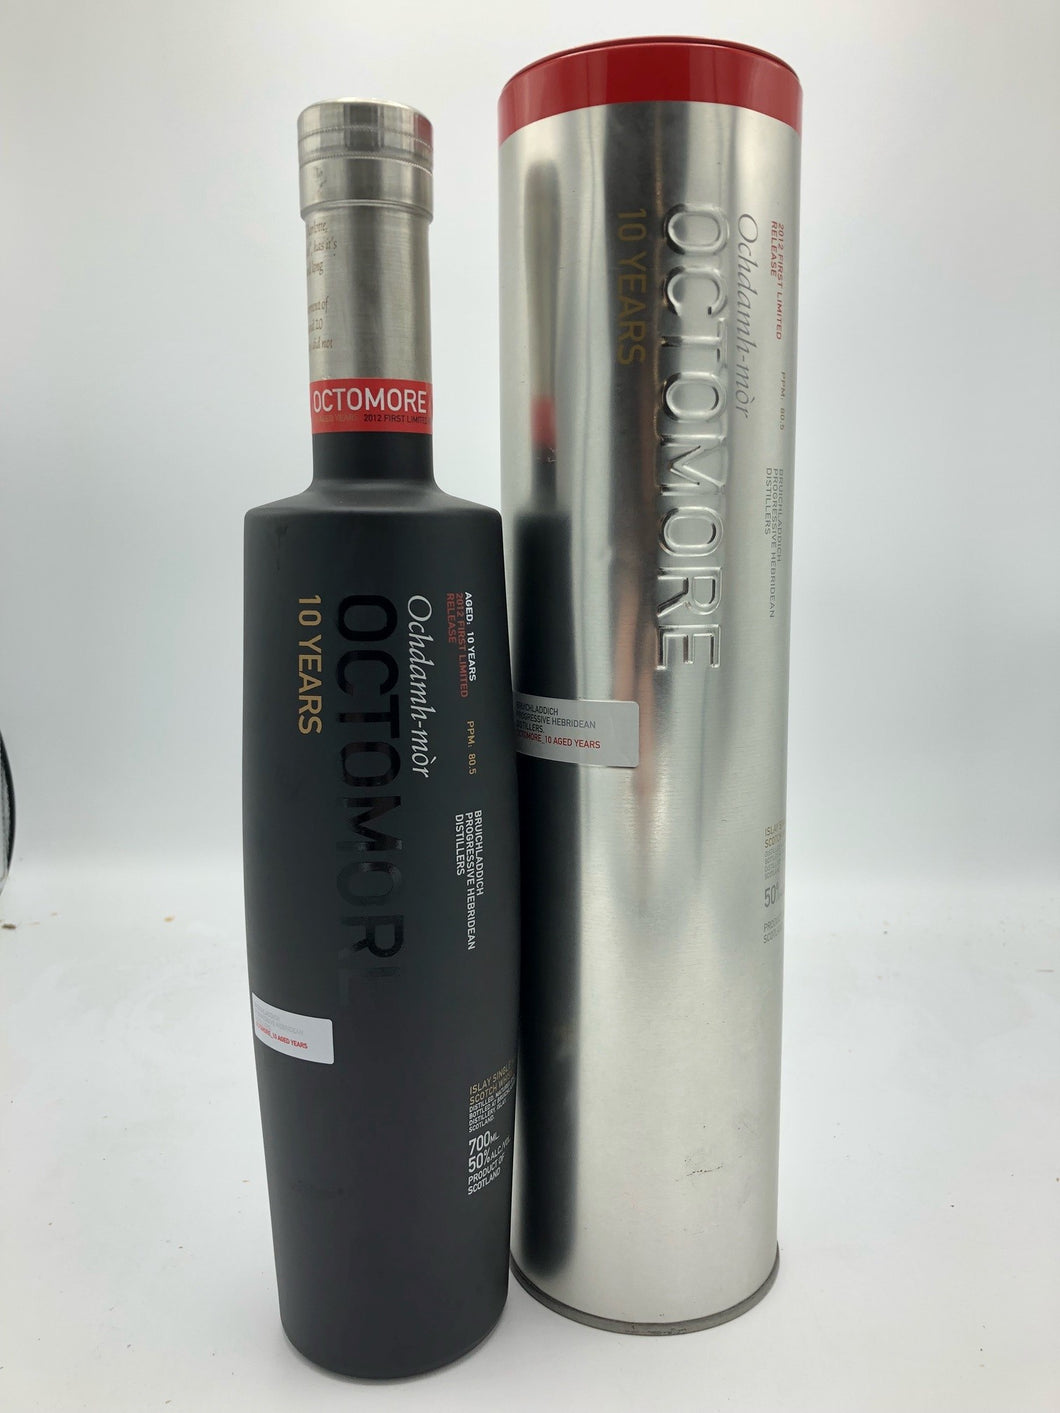 Bruichladdich Octomore 10 Year Old First Limited Release 2012